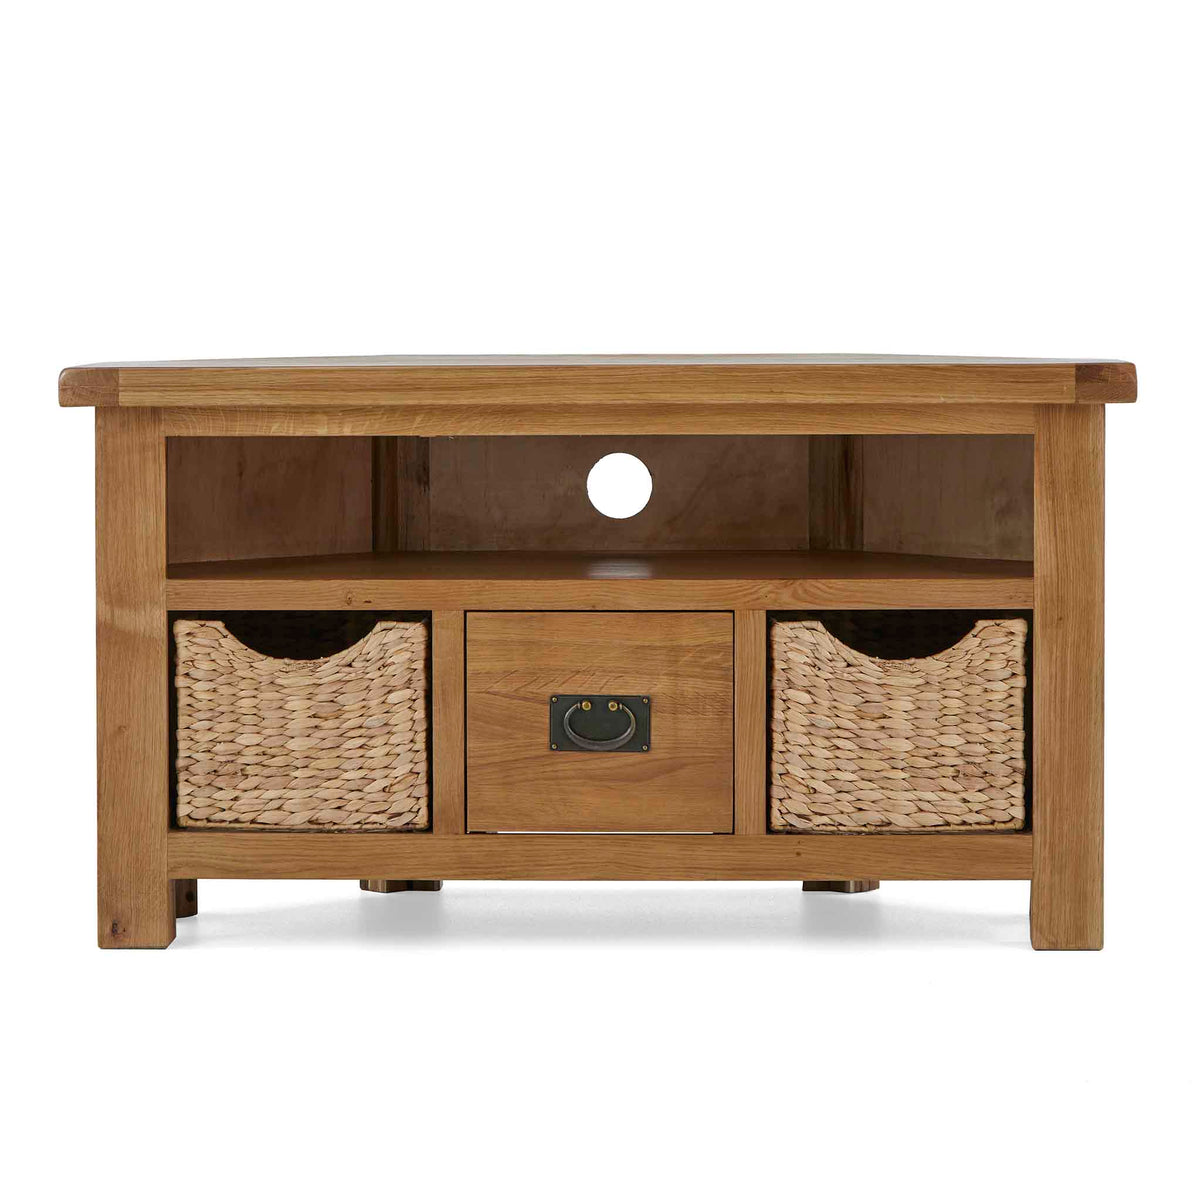 Zelah Oak Corner TV Stand with Baskets - Front view